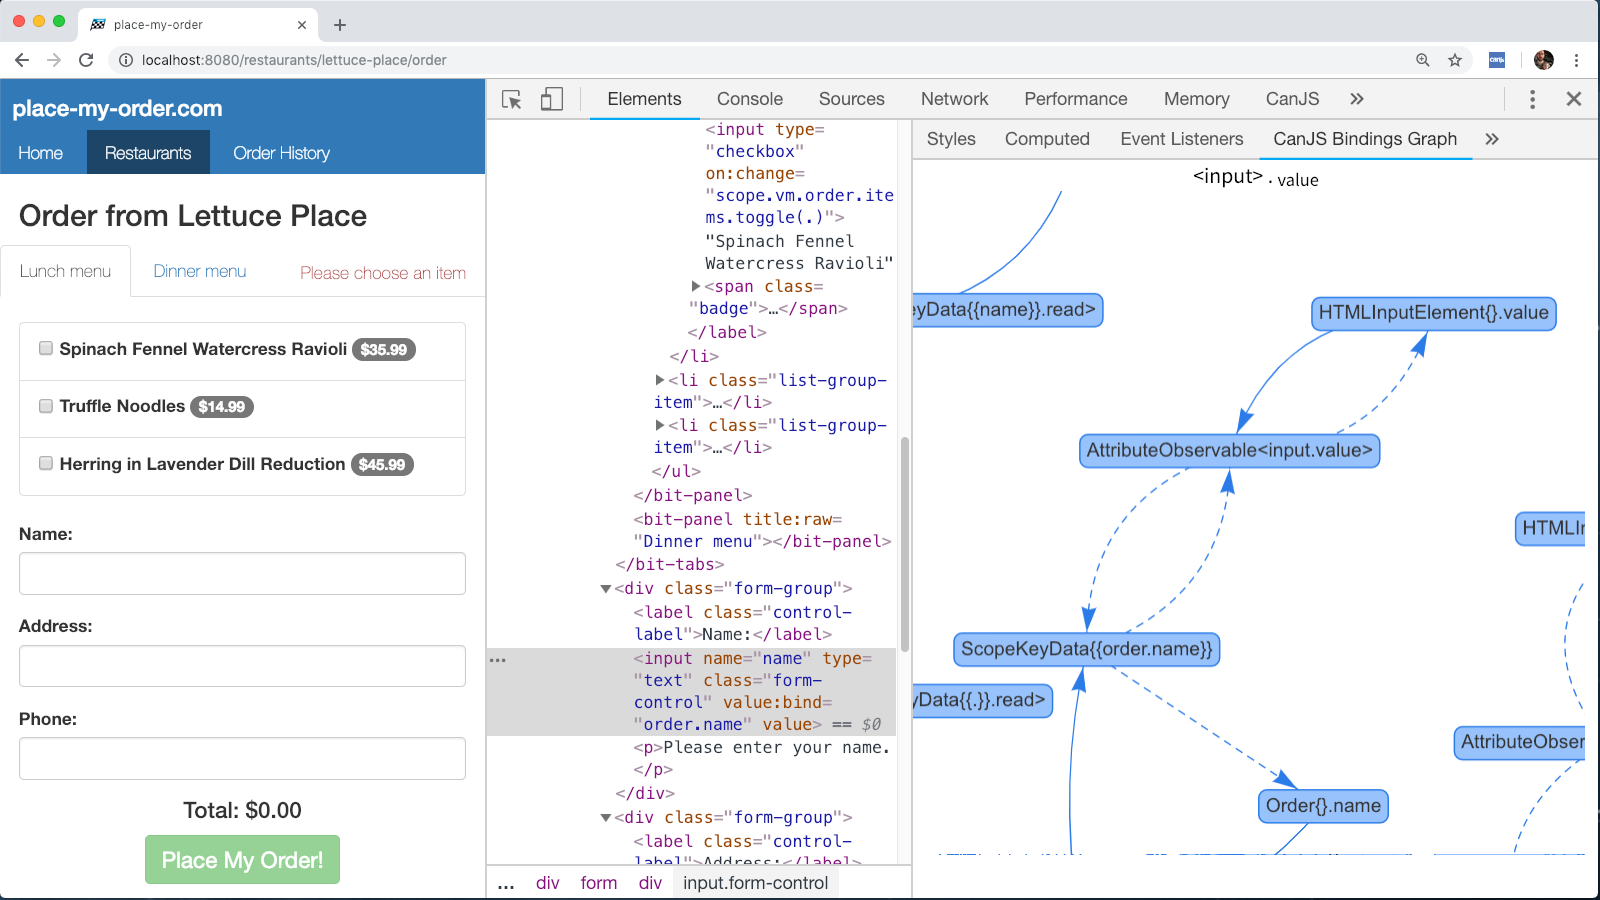 The CanJS Devtools Bindings Graph for Element